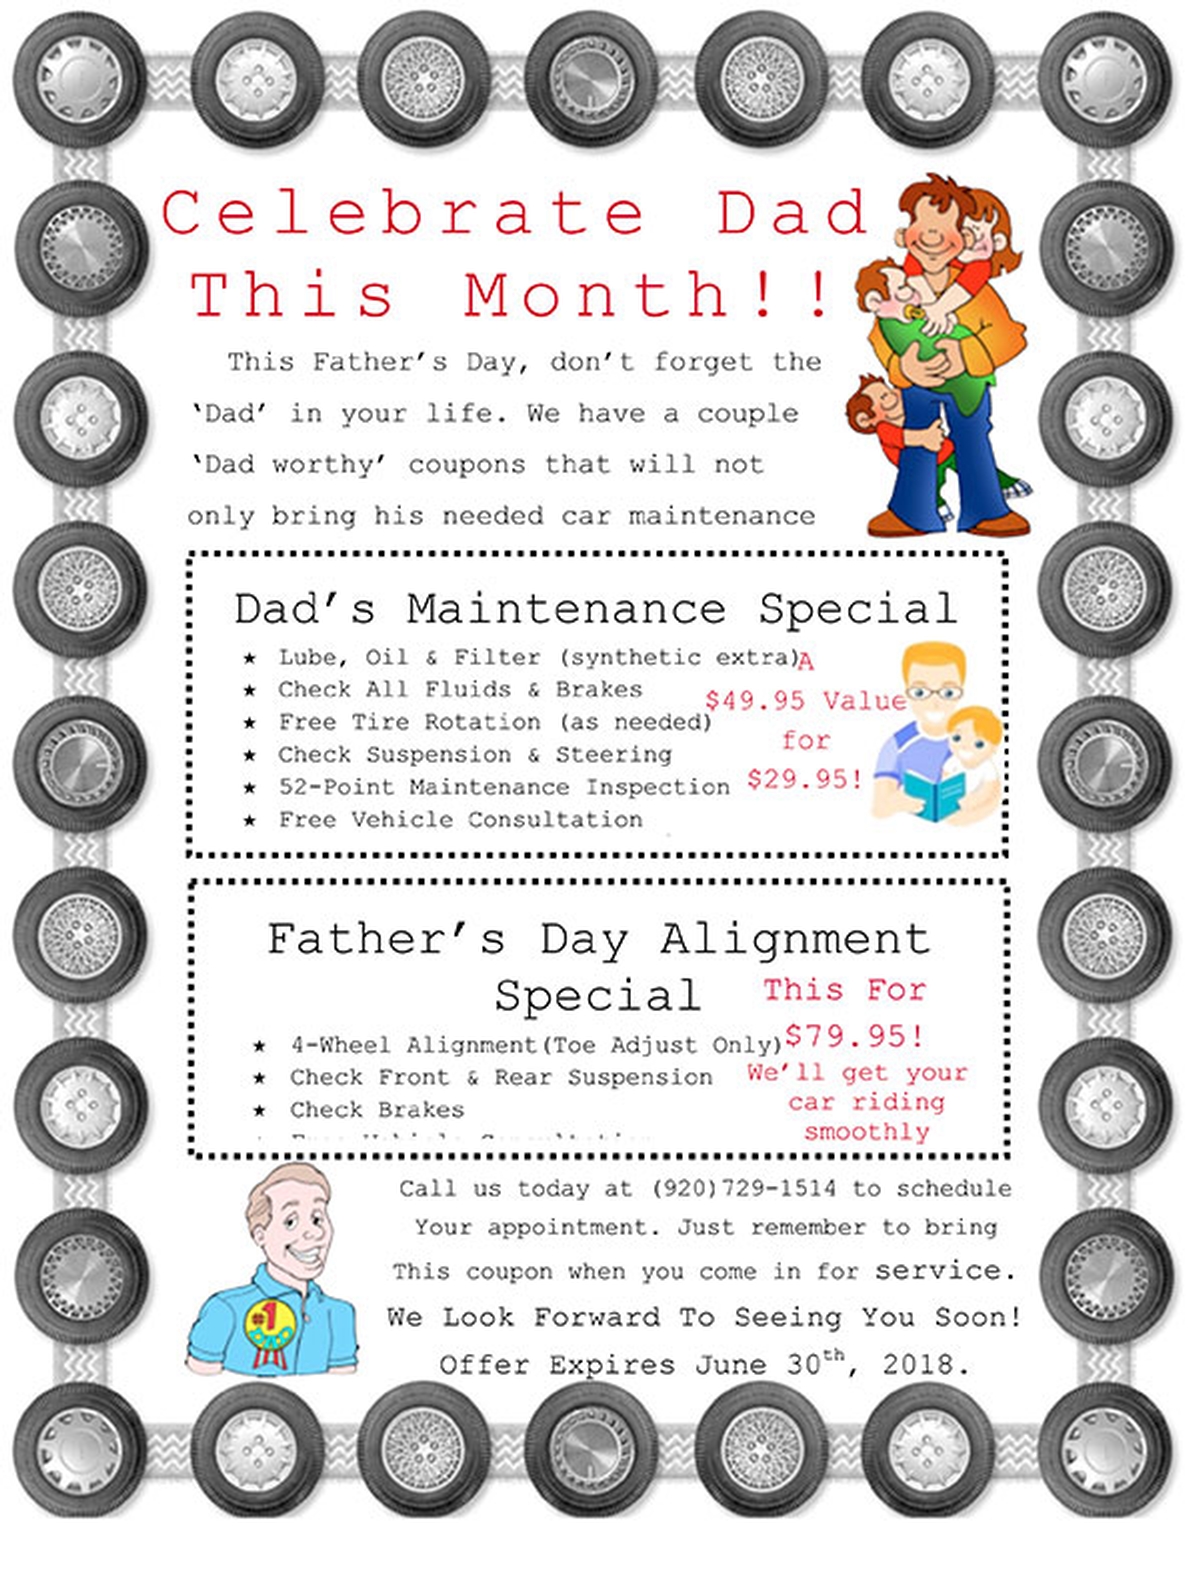 Celebrate Dad This Month